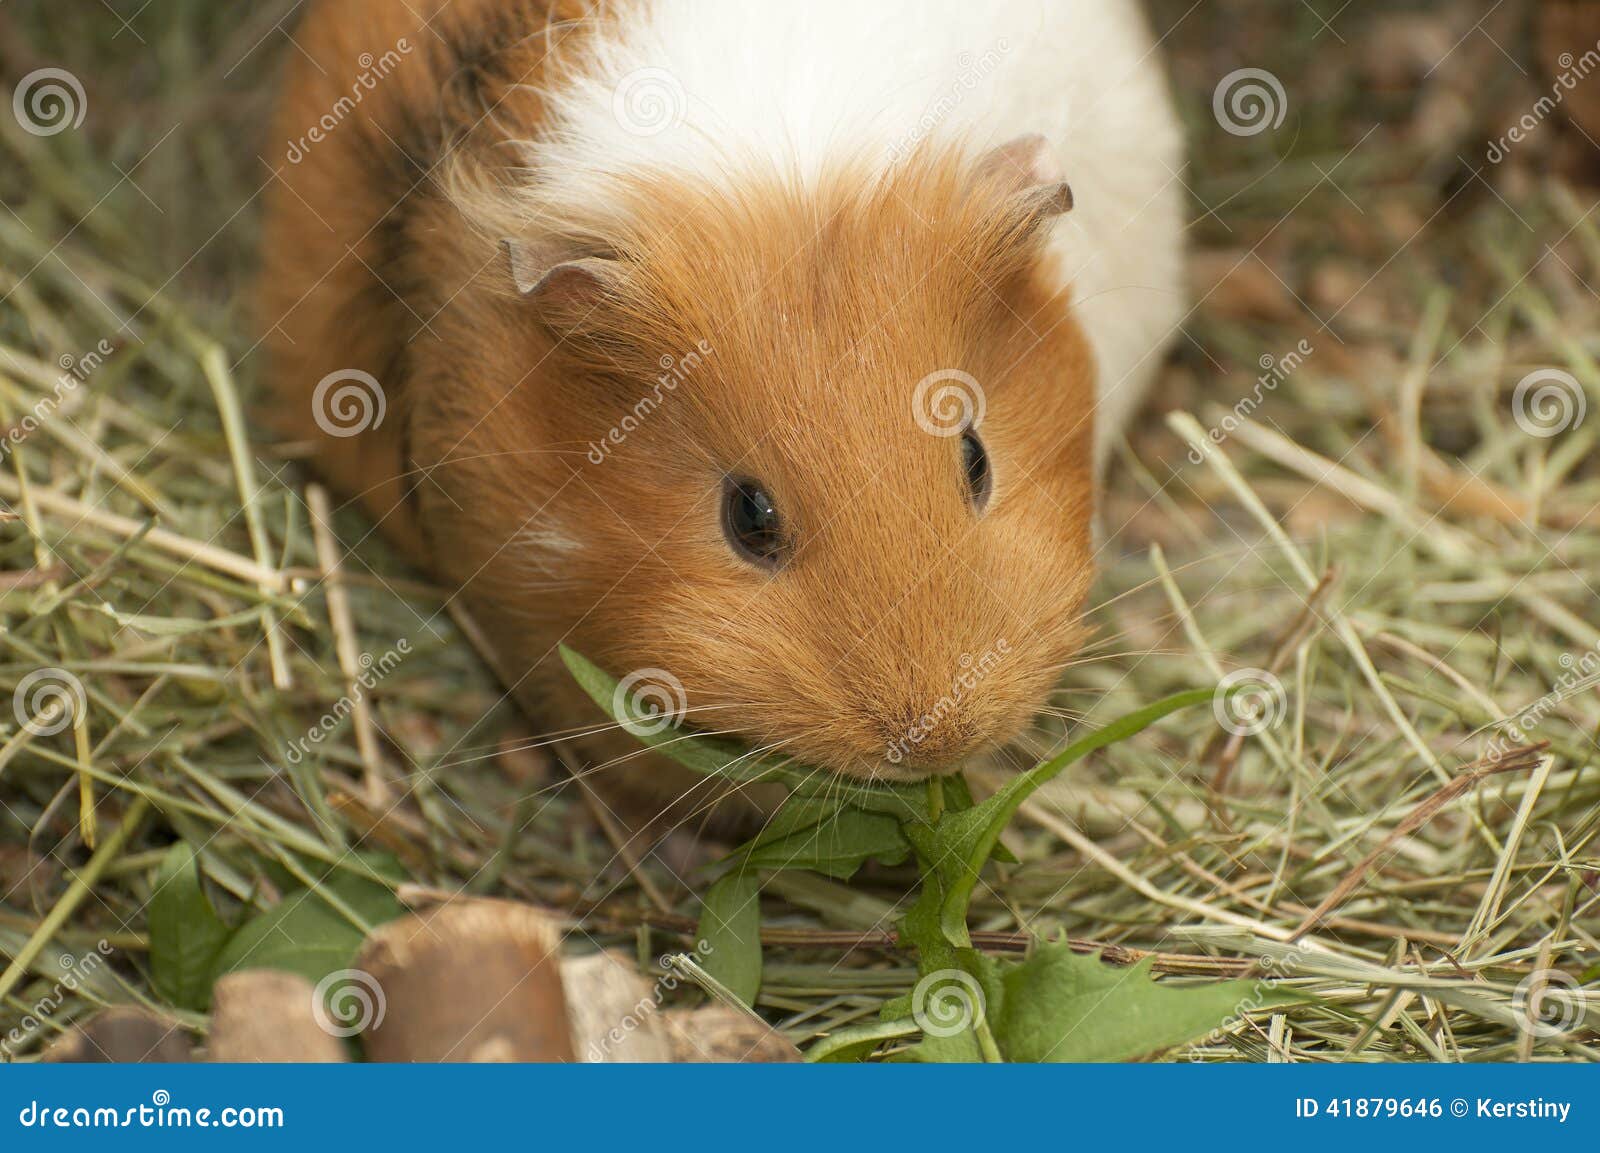 It is image of Guinea pig.